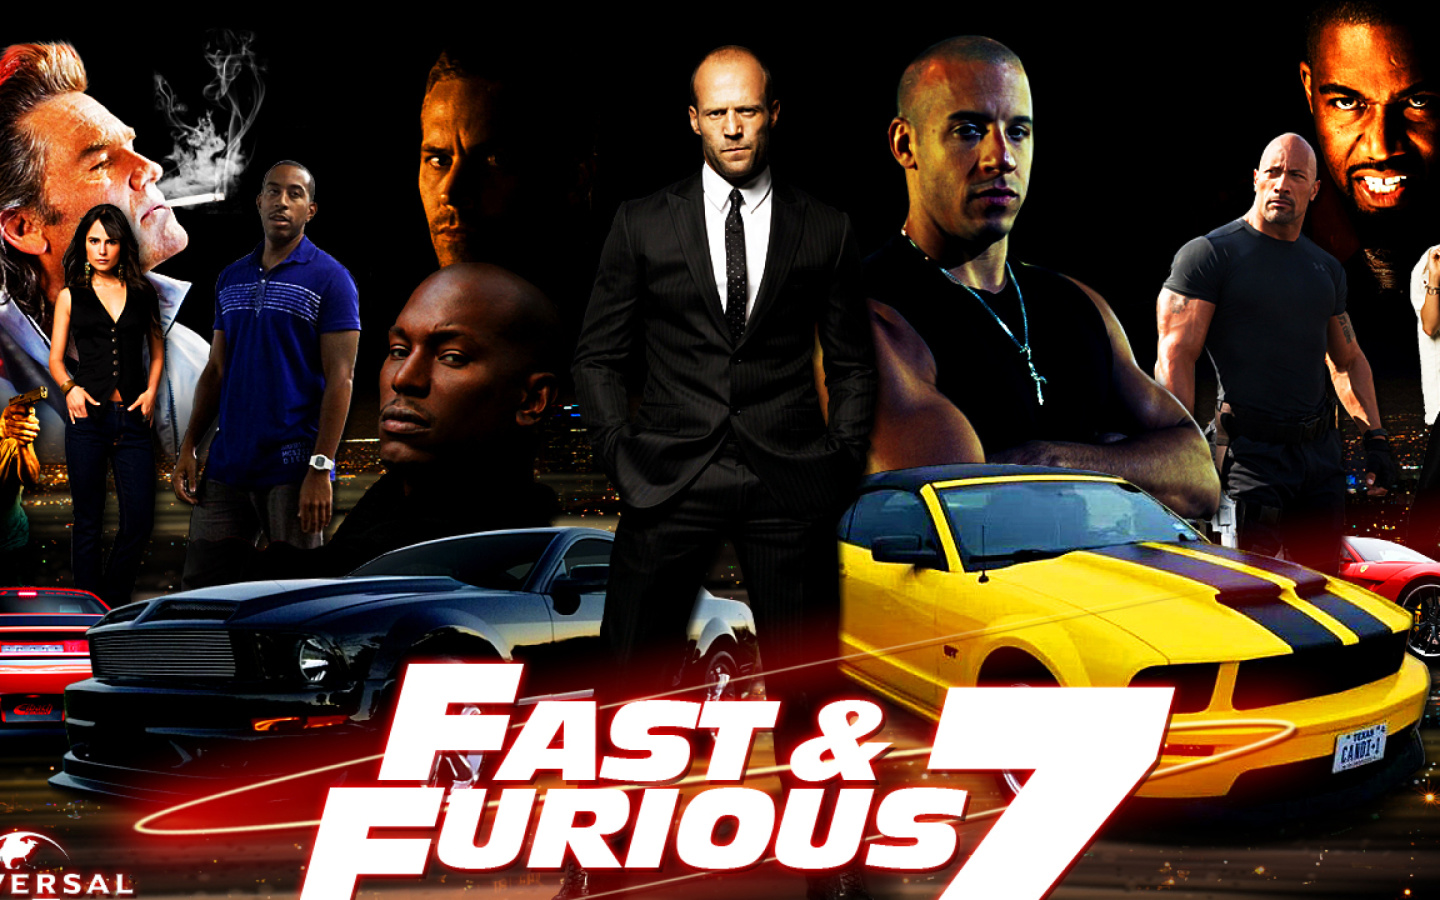 Fast and Furious 7 Movie wallpaper 1440x900